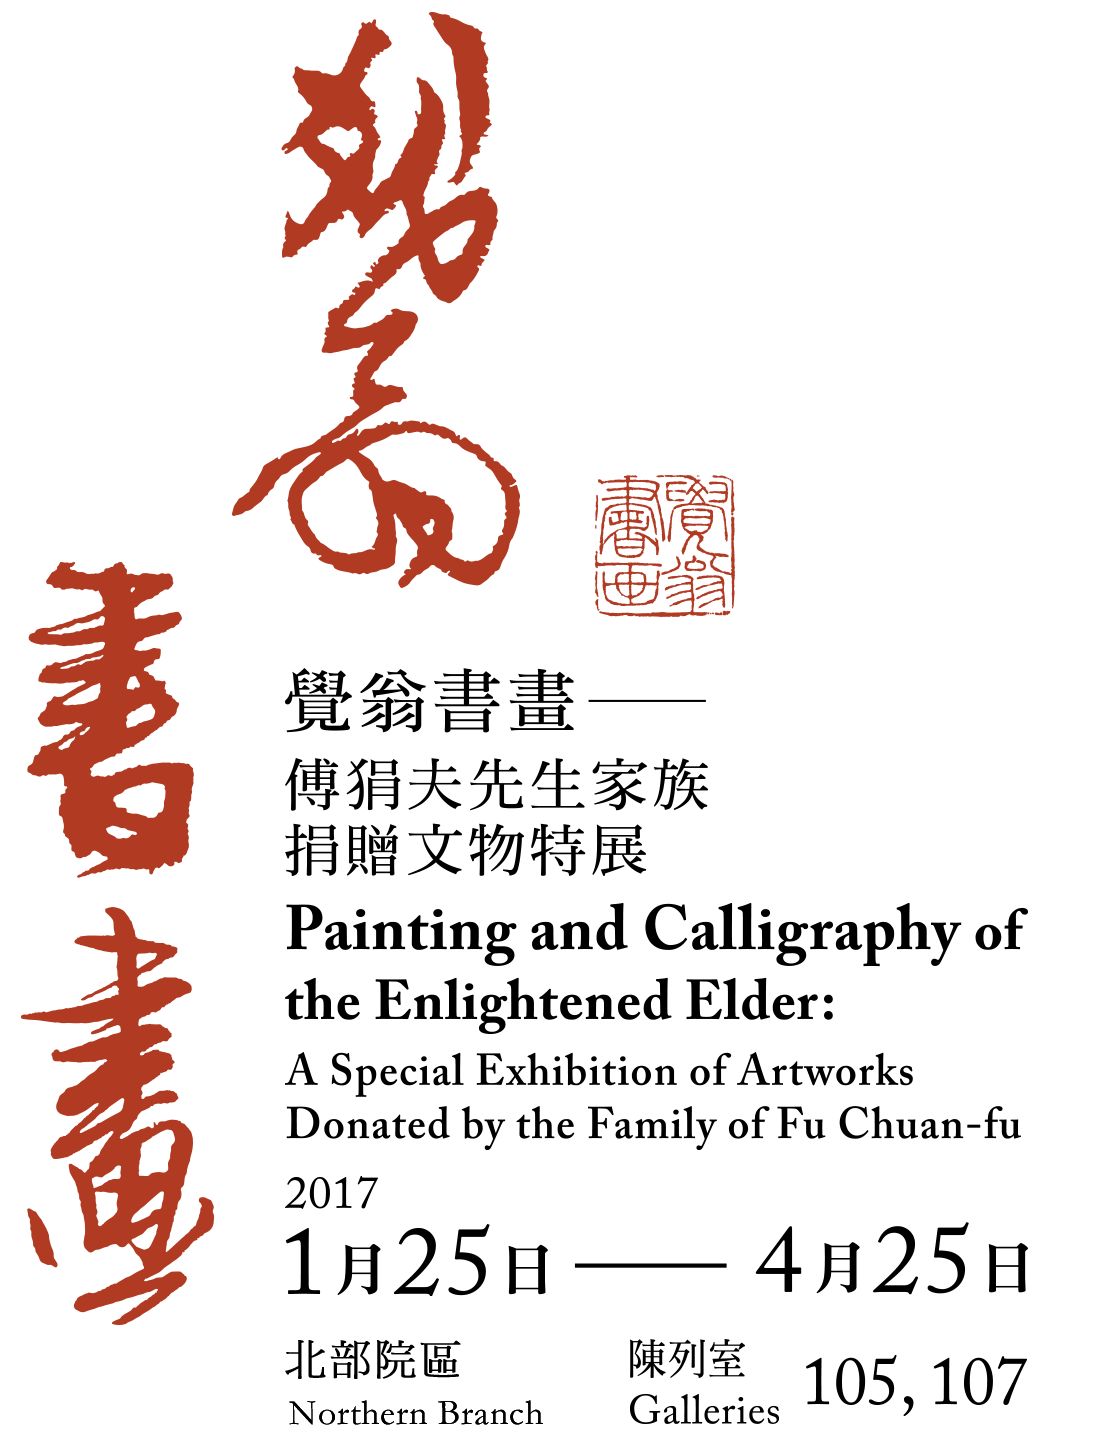 Painting and Calligraphy of the Enlightened Elder: A Special Exhibition of Artworks Donated by the Family of Fu Chuan-fu, period 2017/01/25 to 2017/04/25,Galleries105、107